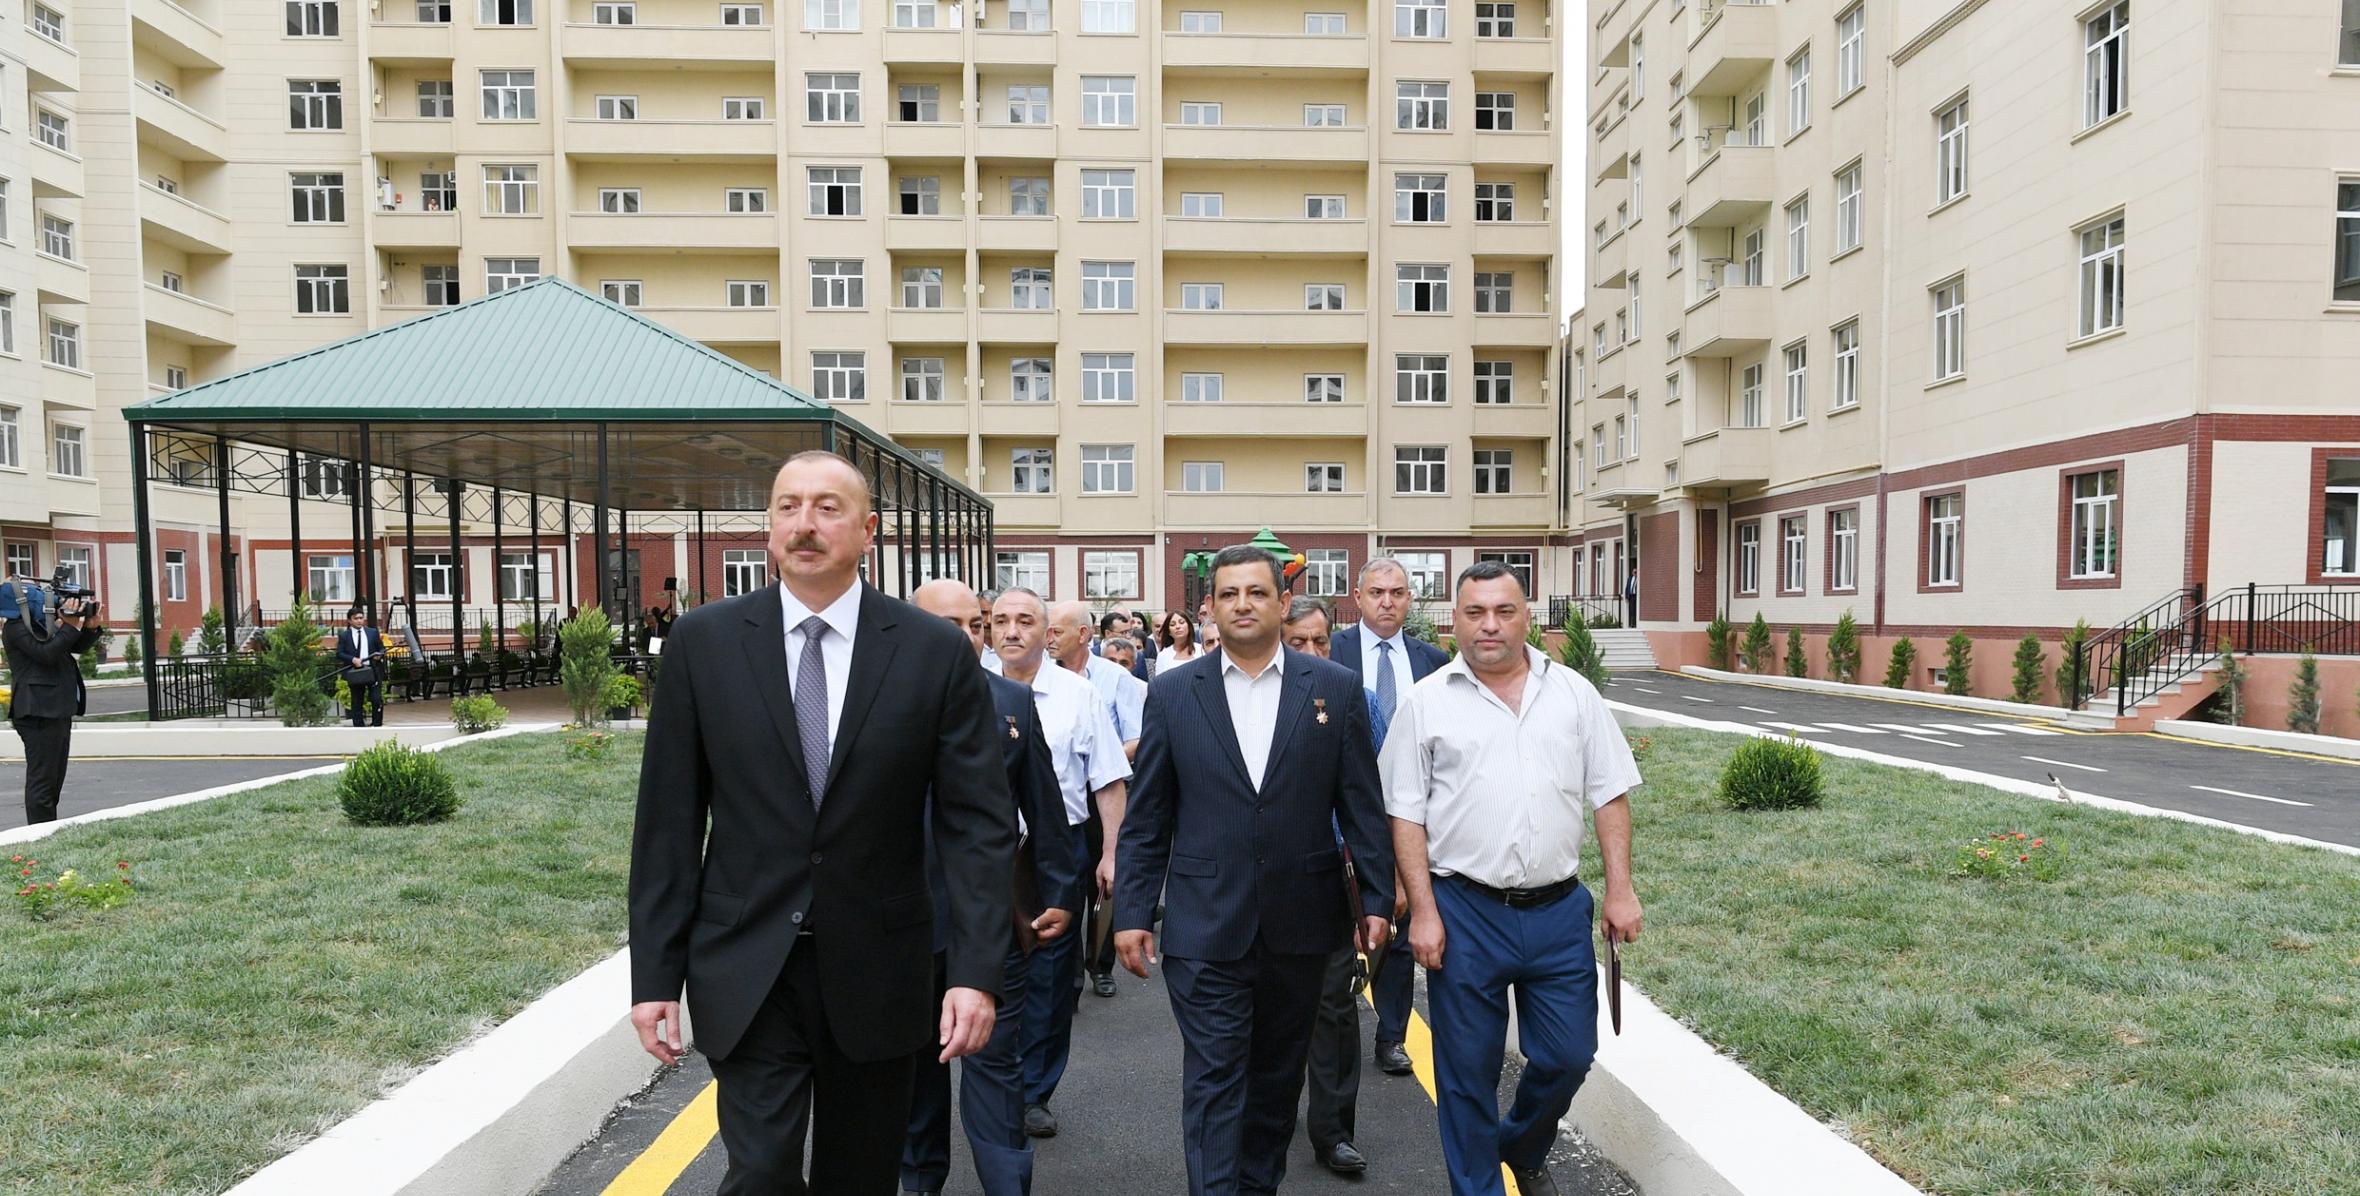 Ceremony was held to give out apartments and cars to veterans of Karabakh and Great wars, the Chernobyl disabled and families of martyrs